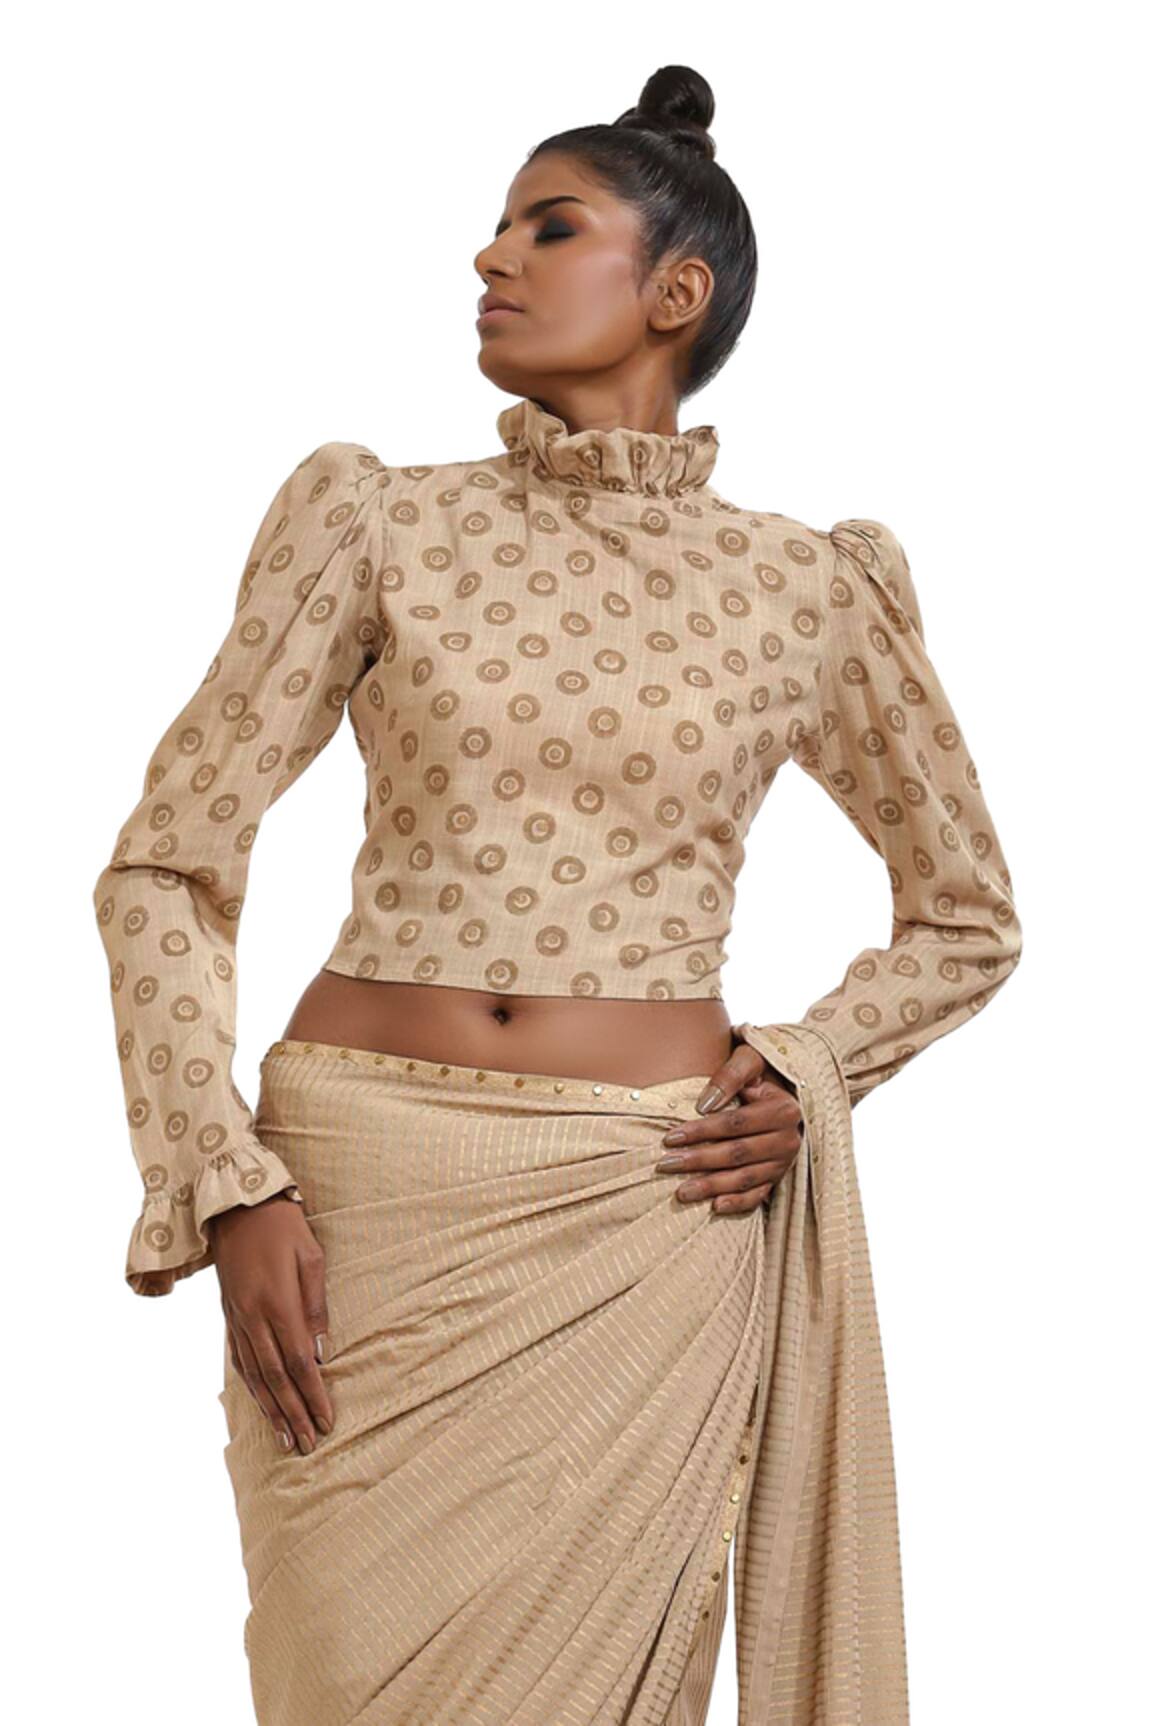 Long Sleeve Saree Blouse - Buy Long Sleeve Saree Blouse online in India